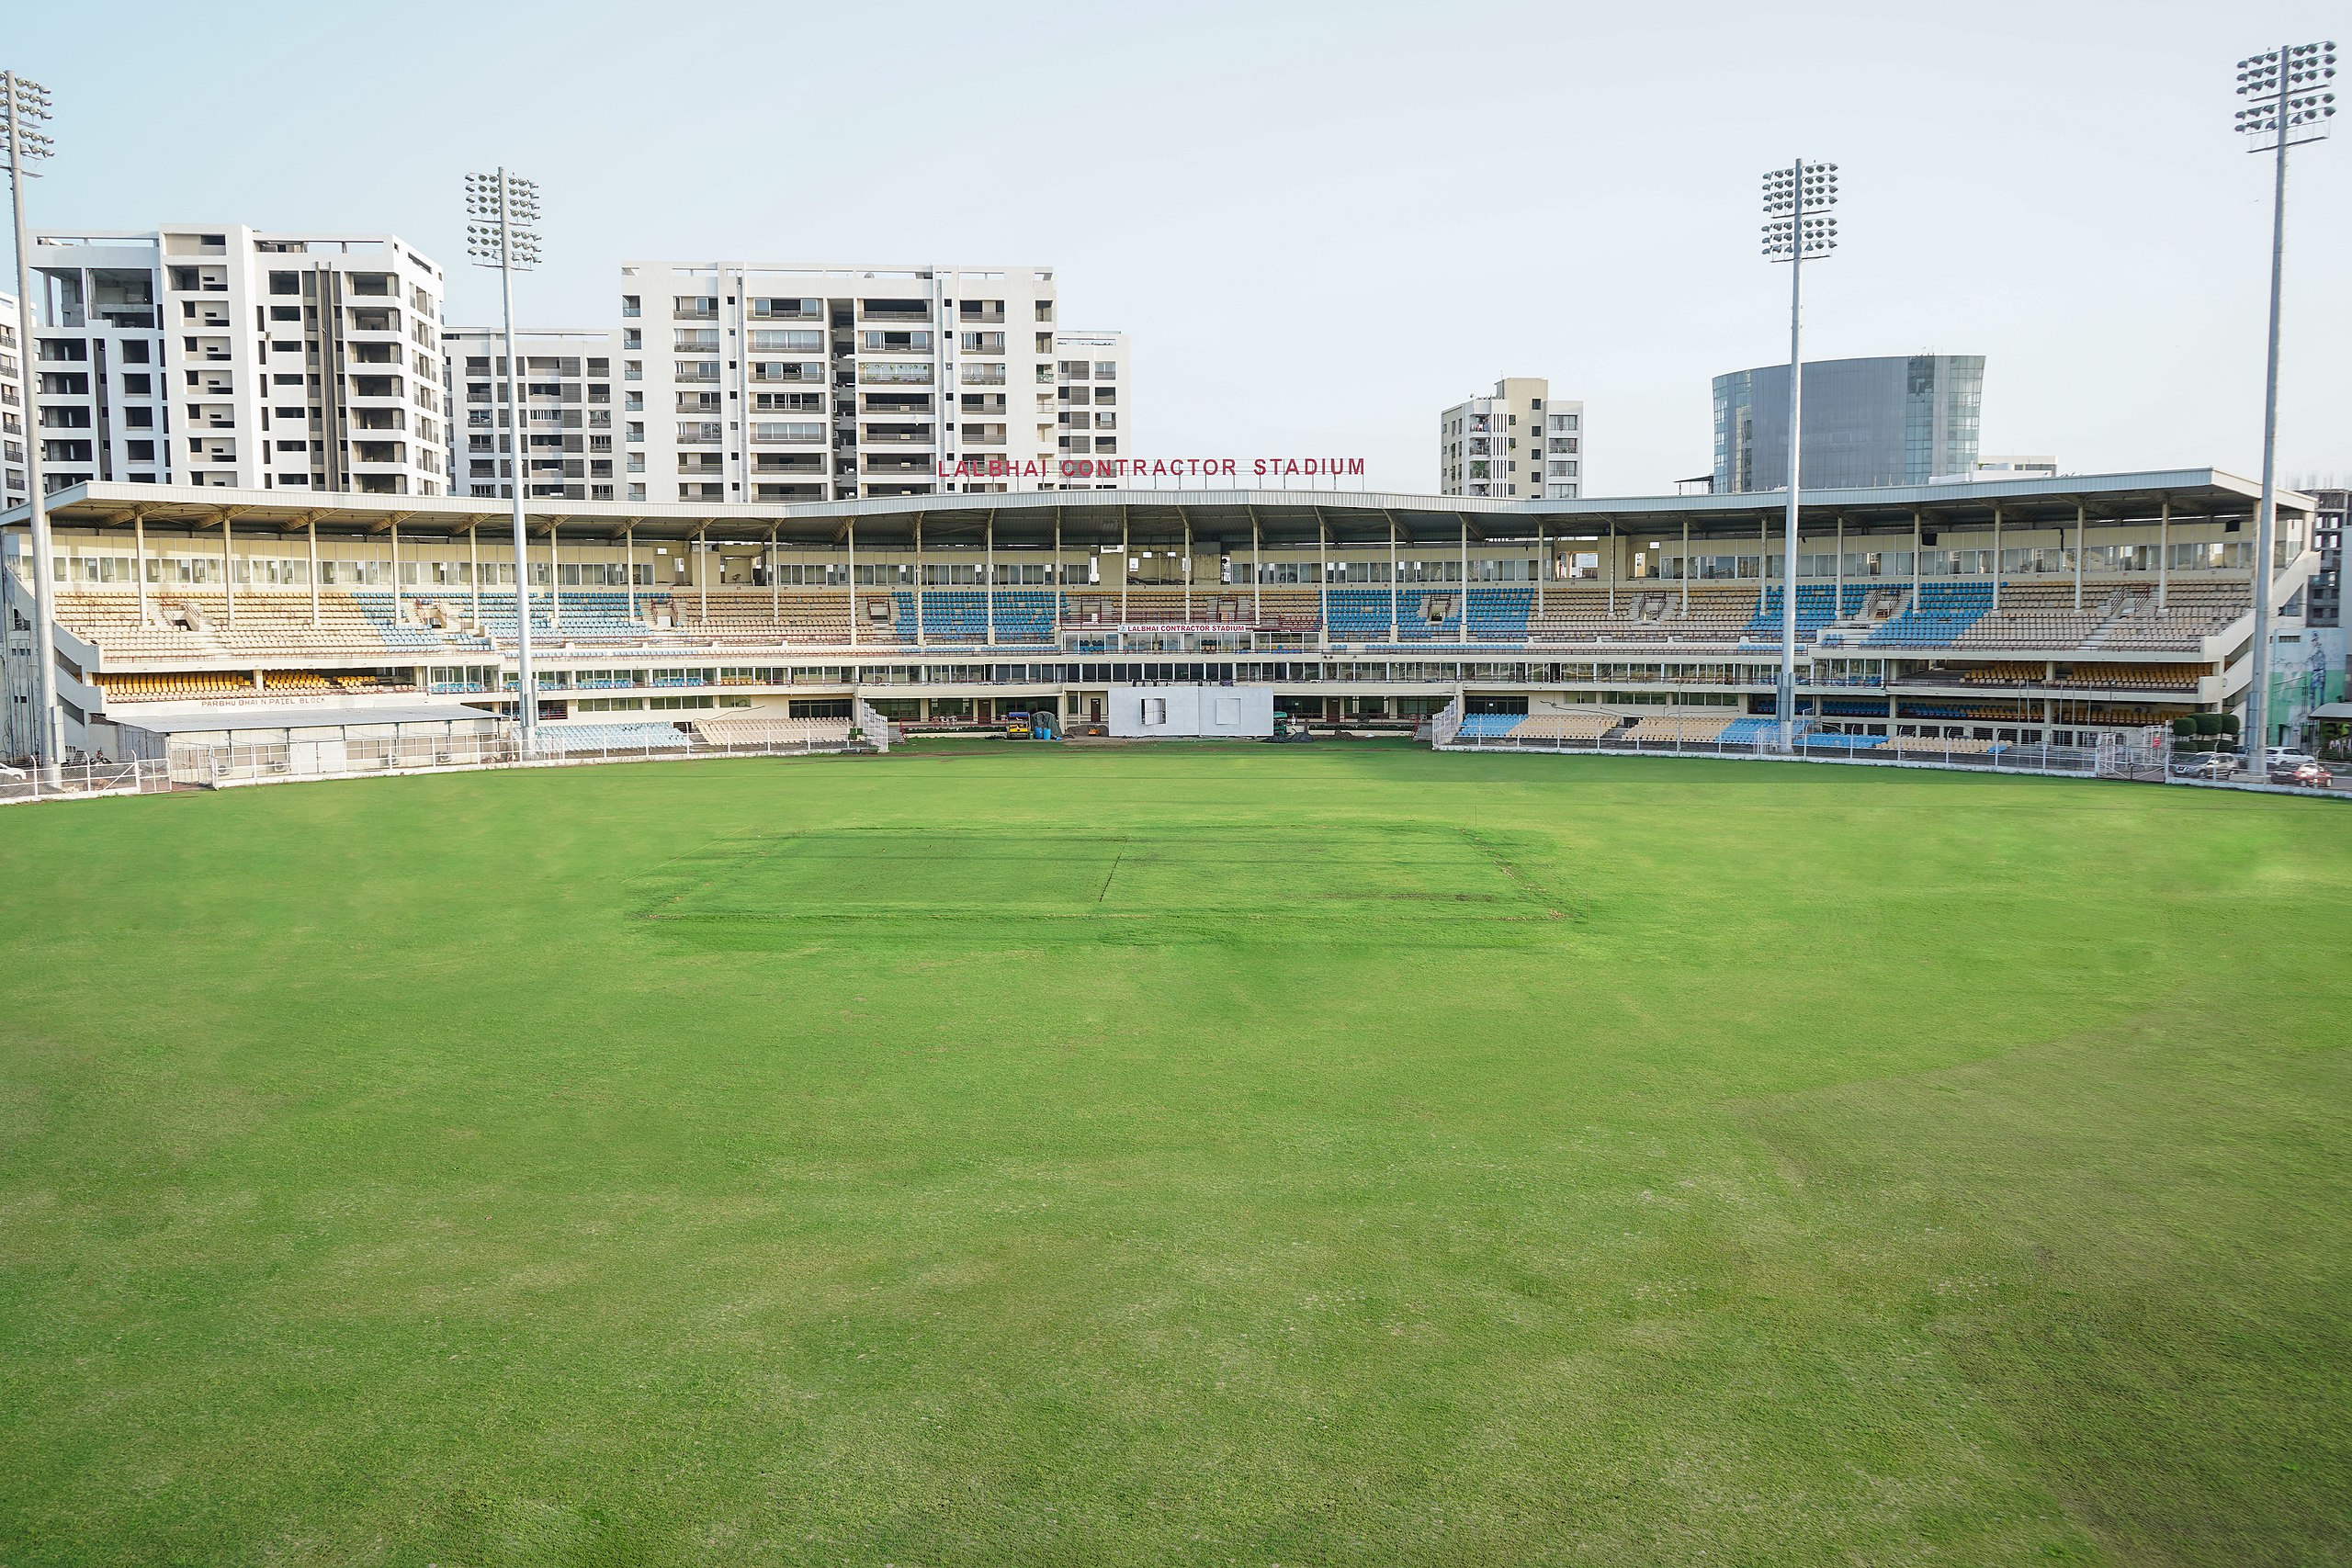 File:Lalbhai Contractor Stadium Wide view.jpg - Wikimedia Commons